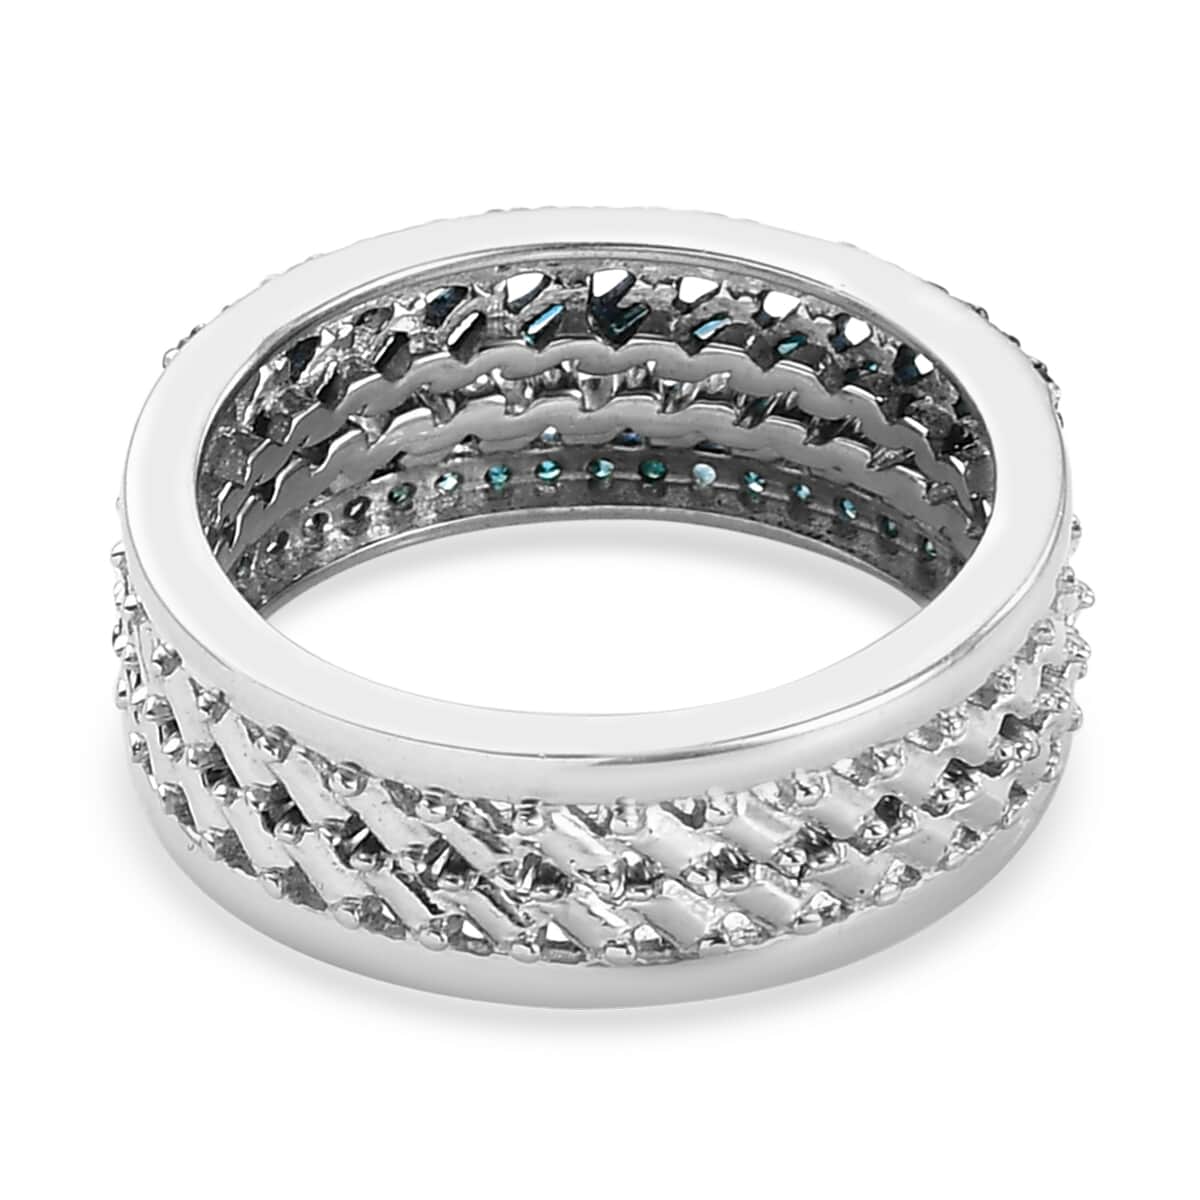 11th-may-tlv-diamond-stackable-band-ring-in-platinum-over-sterling-silver-size-11.0-0.50-ctw image number 5